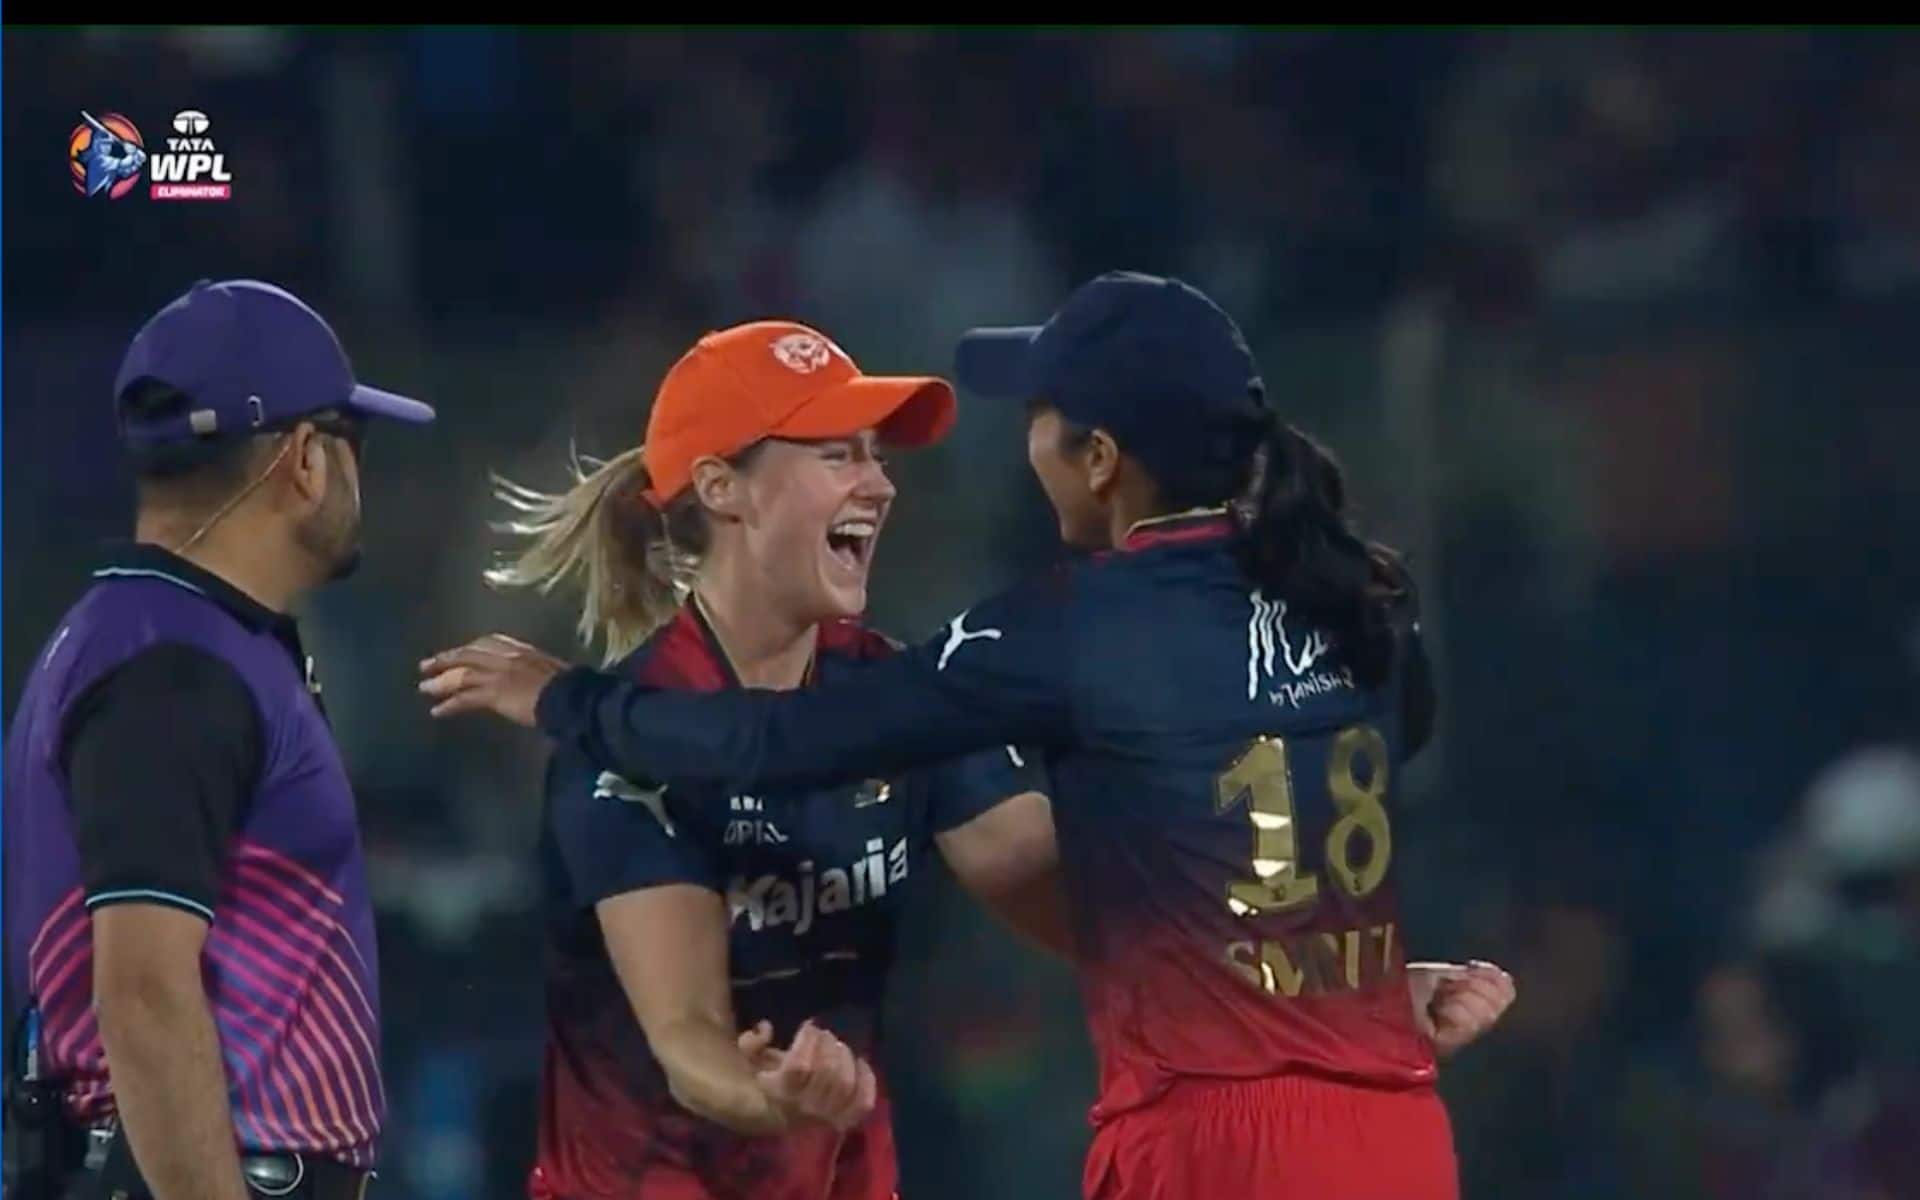 Smriti Mandhana and Ellyse Perry in delight after RCB's win over MI (X.com)